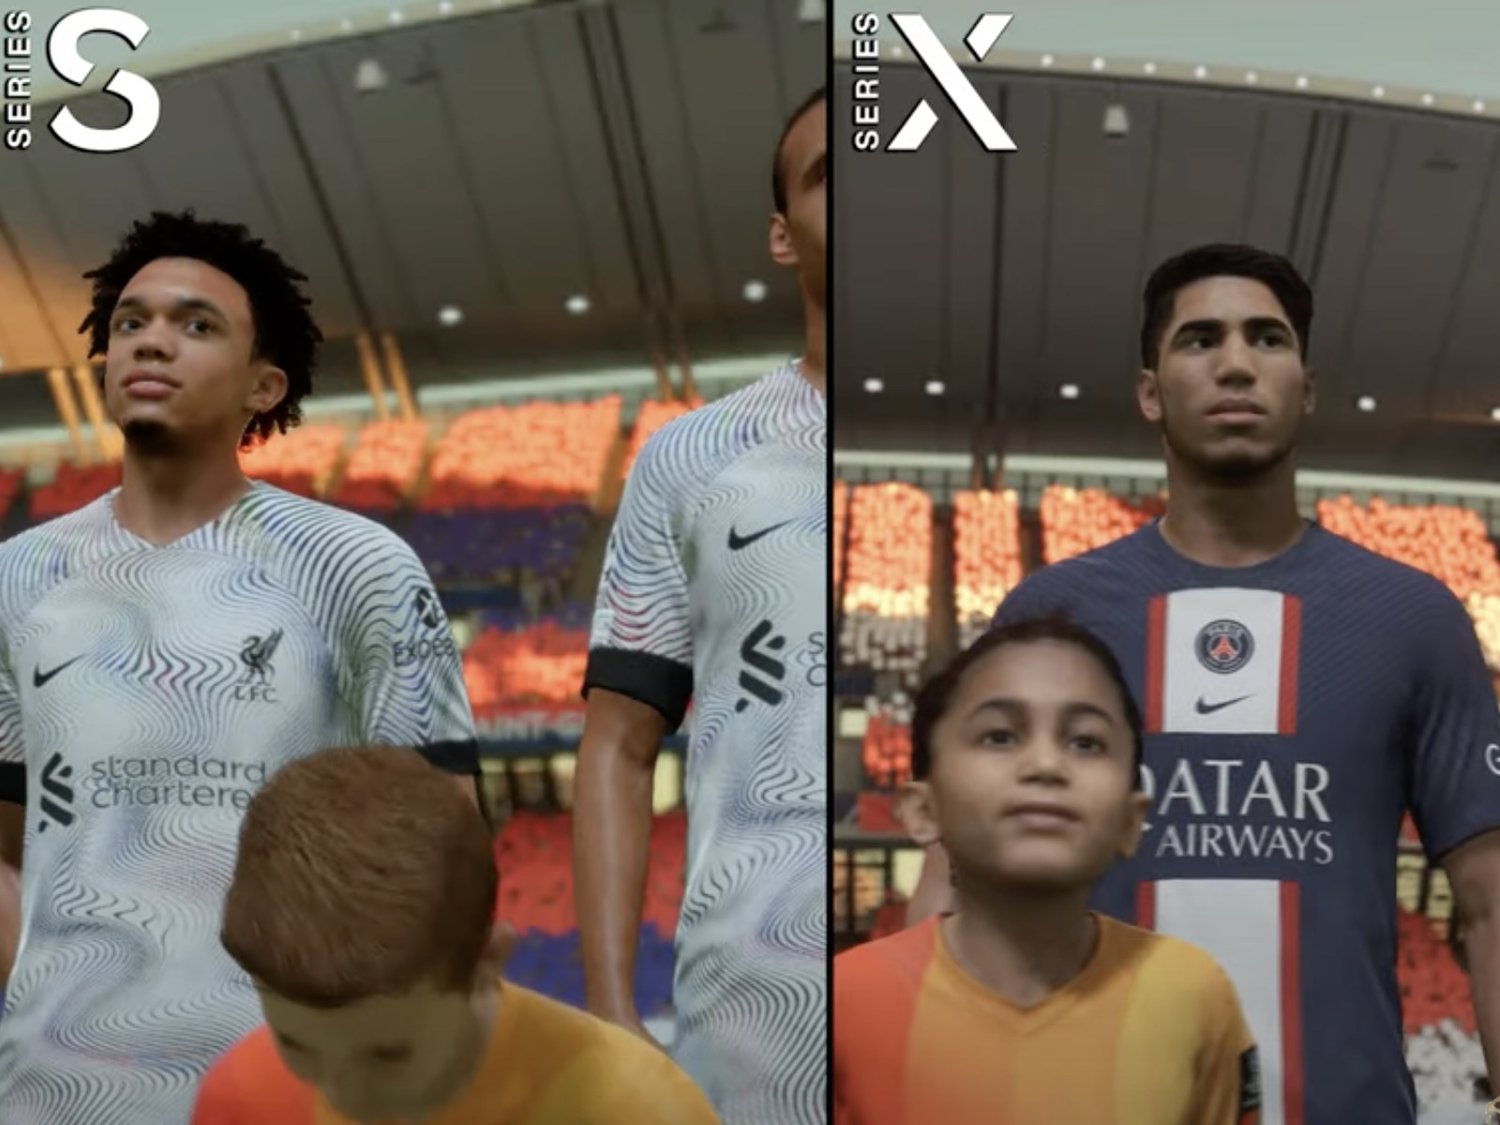 FIFA 23 Xbox One vs. Series S vs. Series X Comparison  Loading Times,  Graphics, Resolution and FPS 